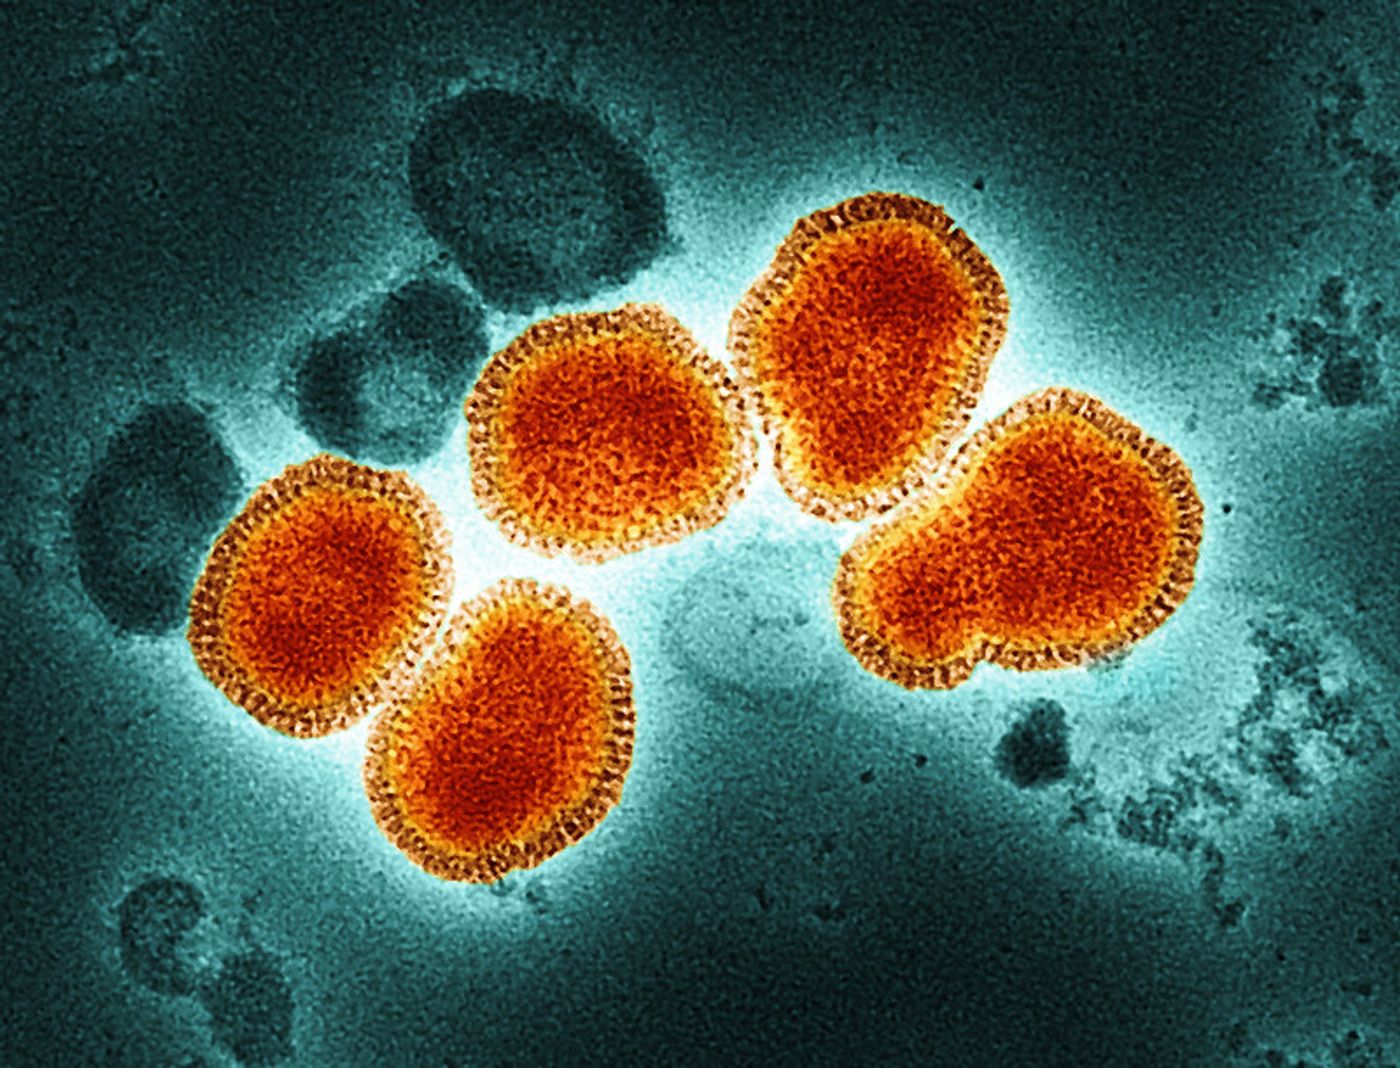 The H3N2 influenza strain, isolated from a patient in Victoria, Australia in 1975. / Credit: National Institute of Allergy and Infectious Diseases (NIAID) / Microscopy by John Gallagher and Audray Harris, NIAID Laboratory of Infectious Diseases